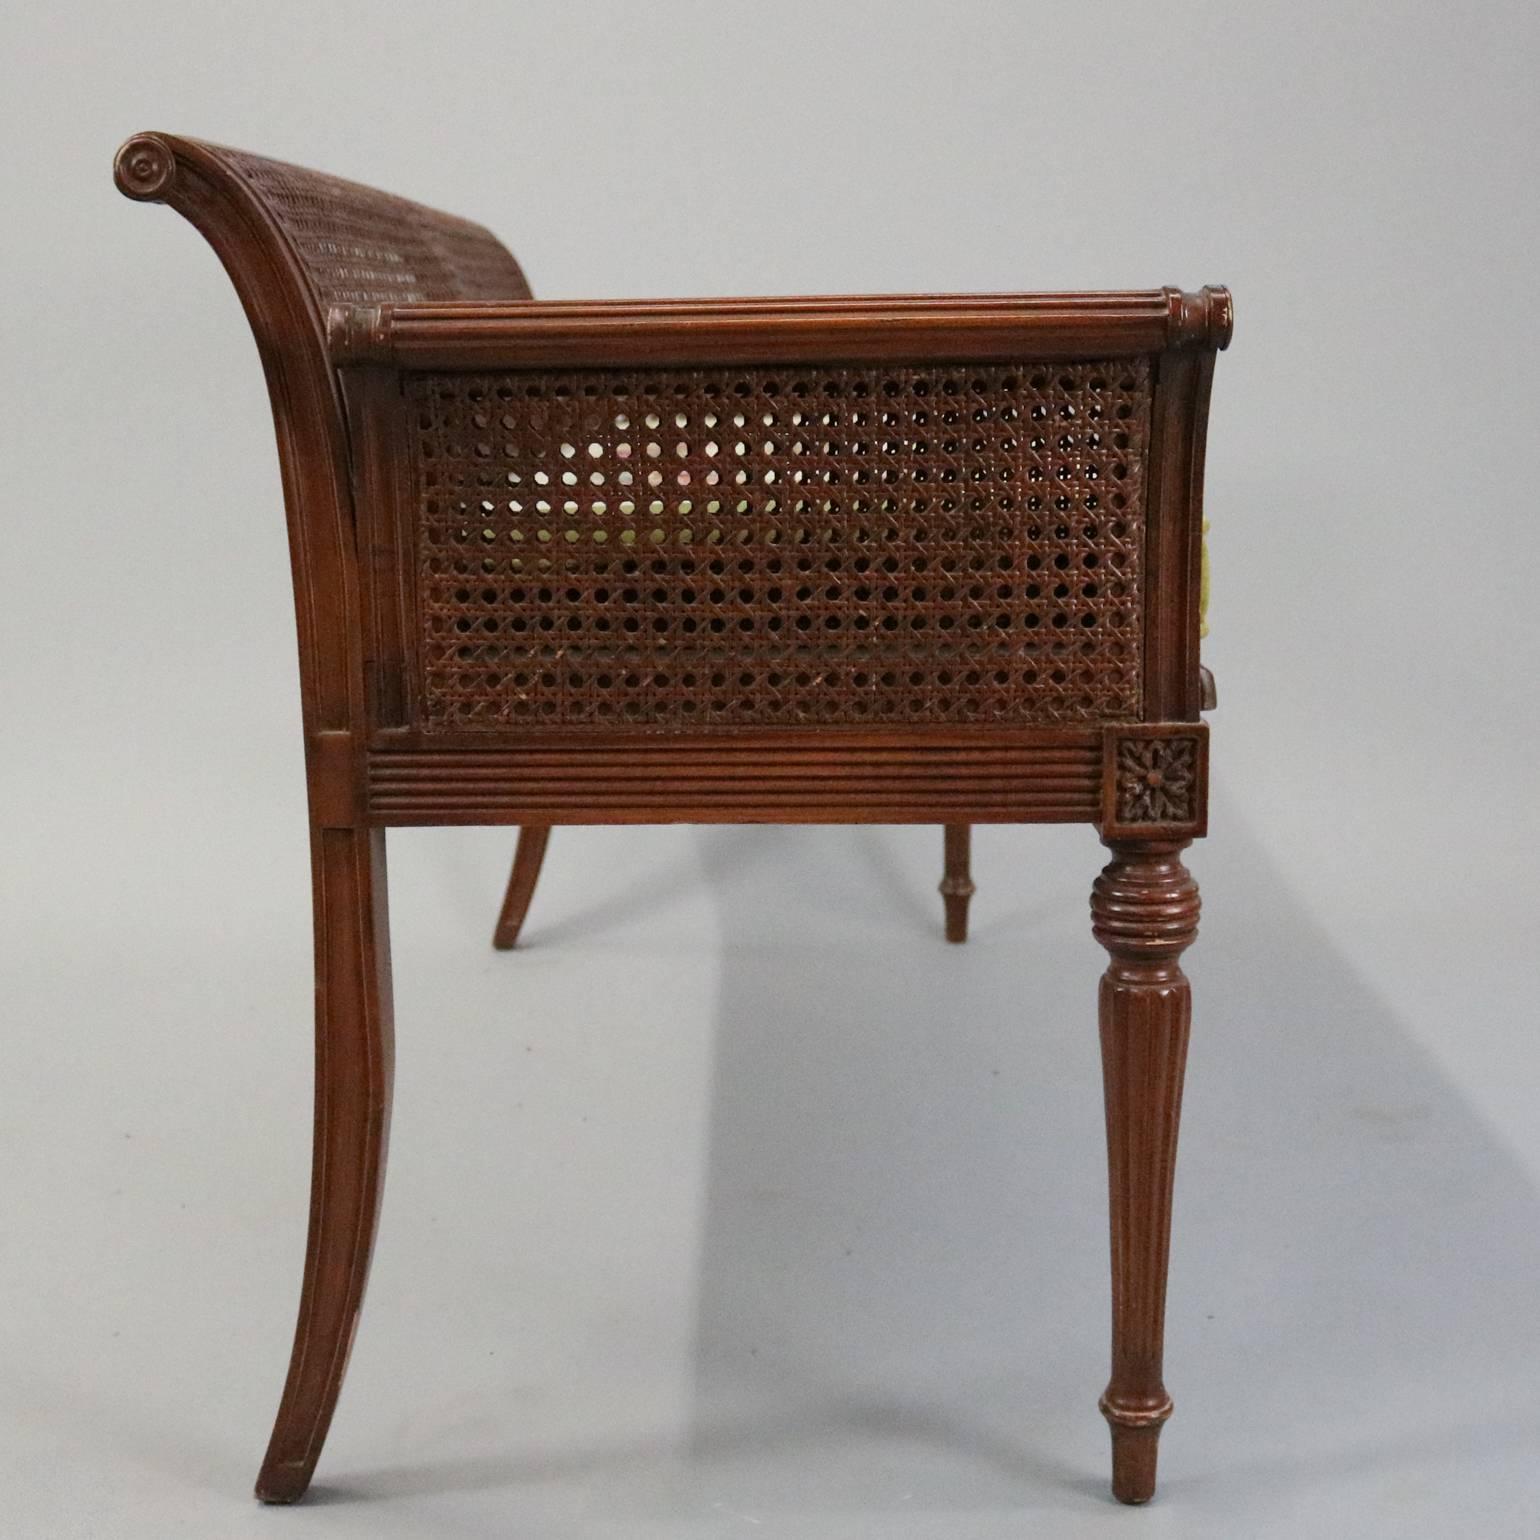 Neoclassical Antique French Classical Carved Mahogany Caned Bench, circa 1840